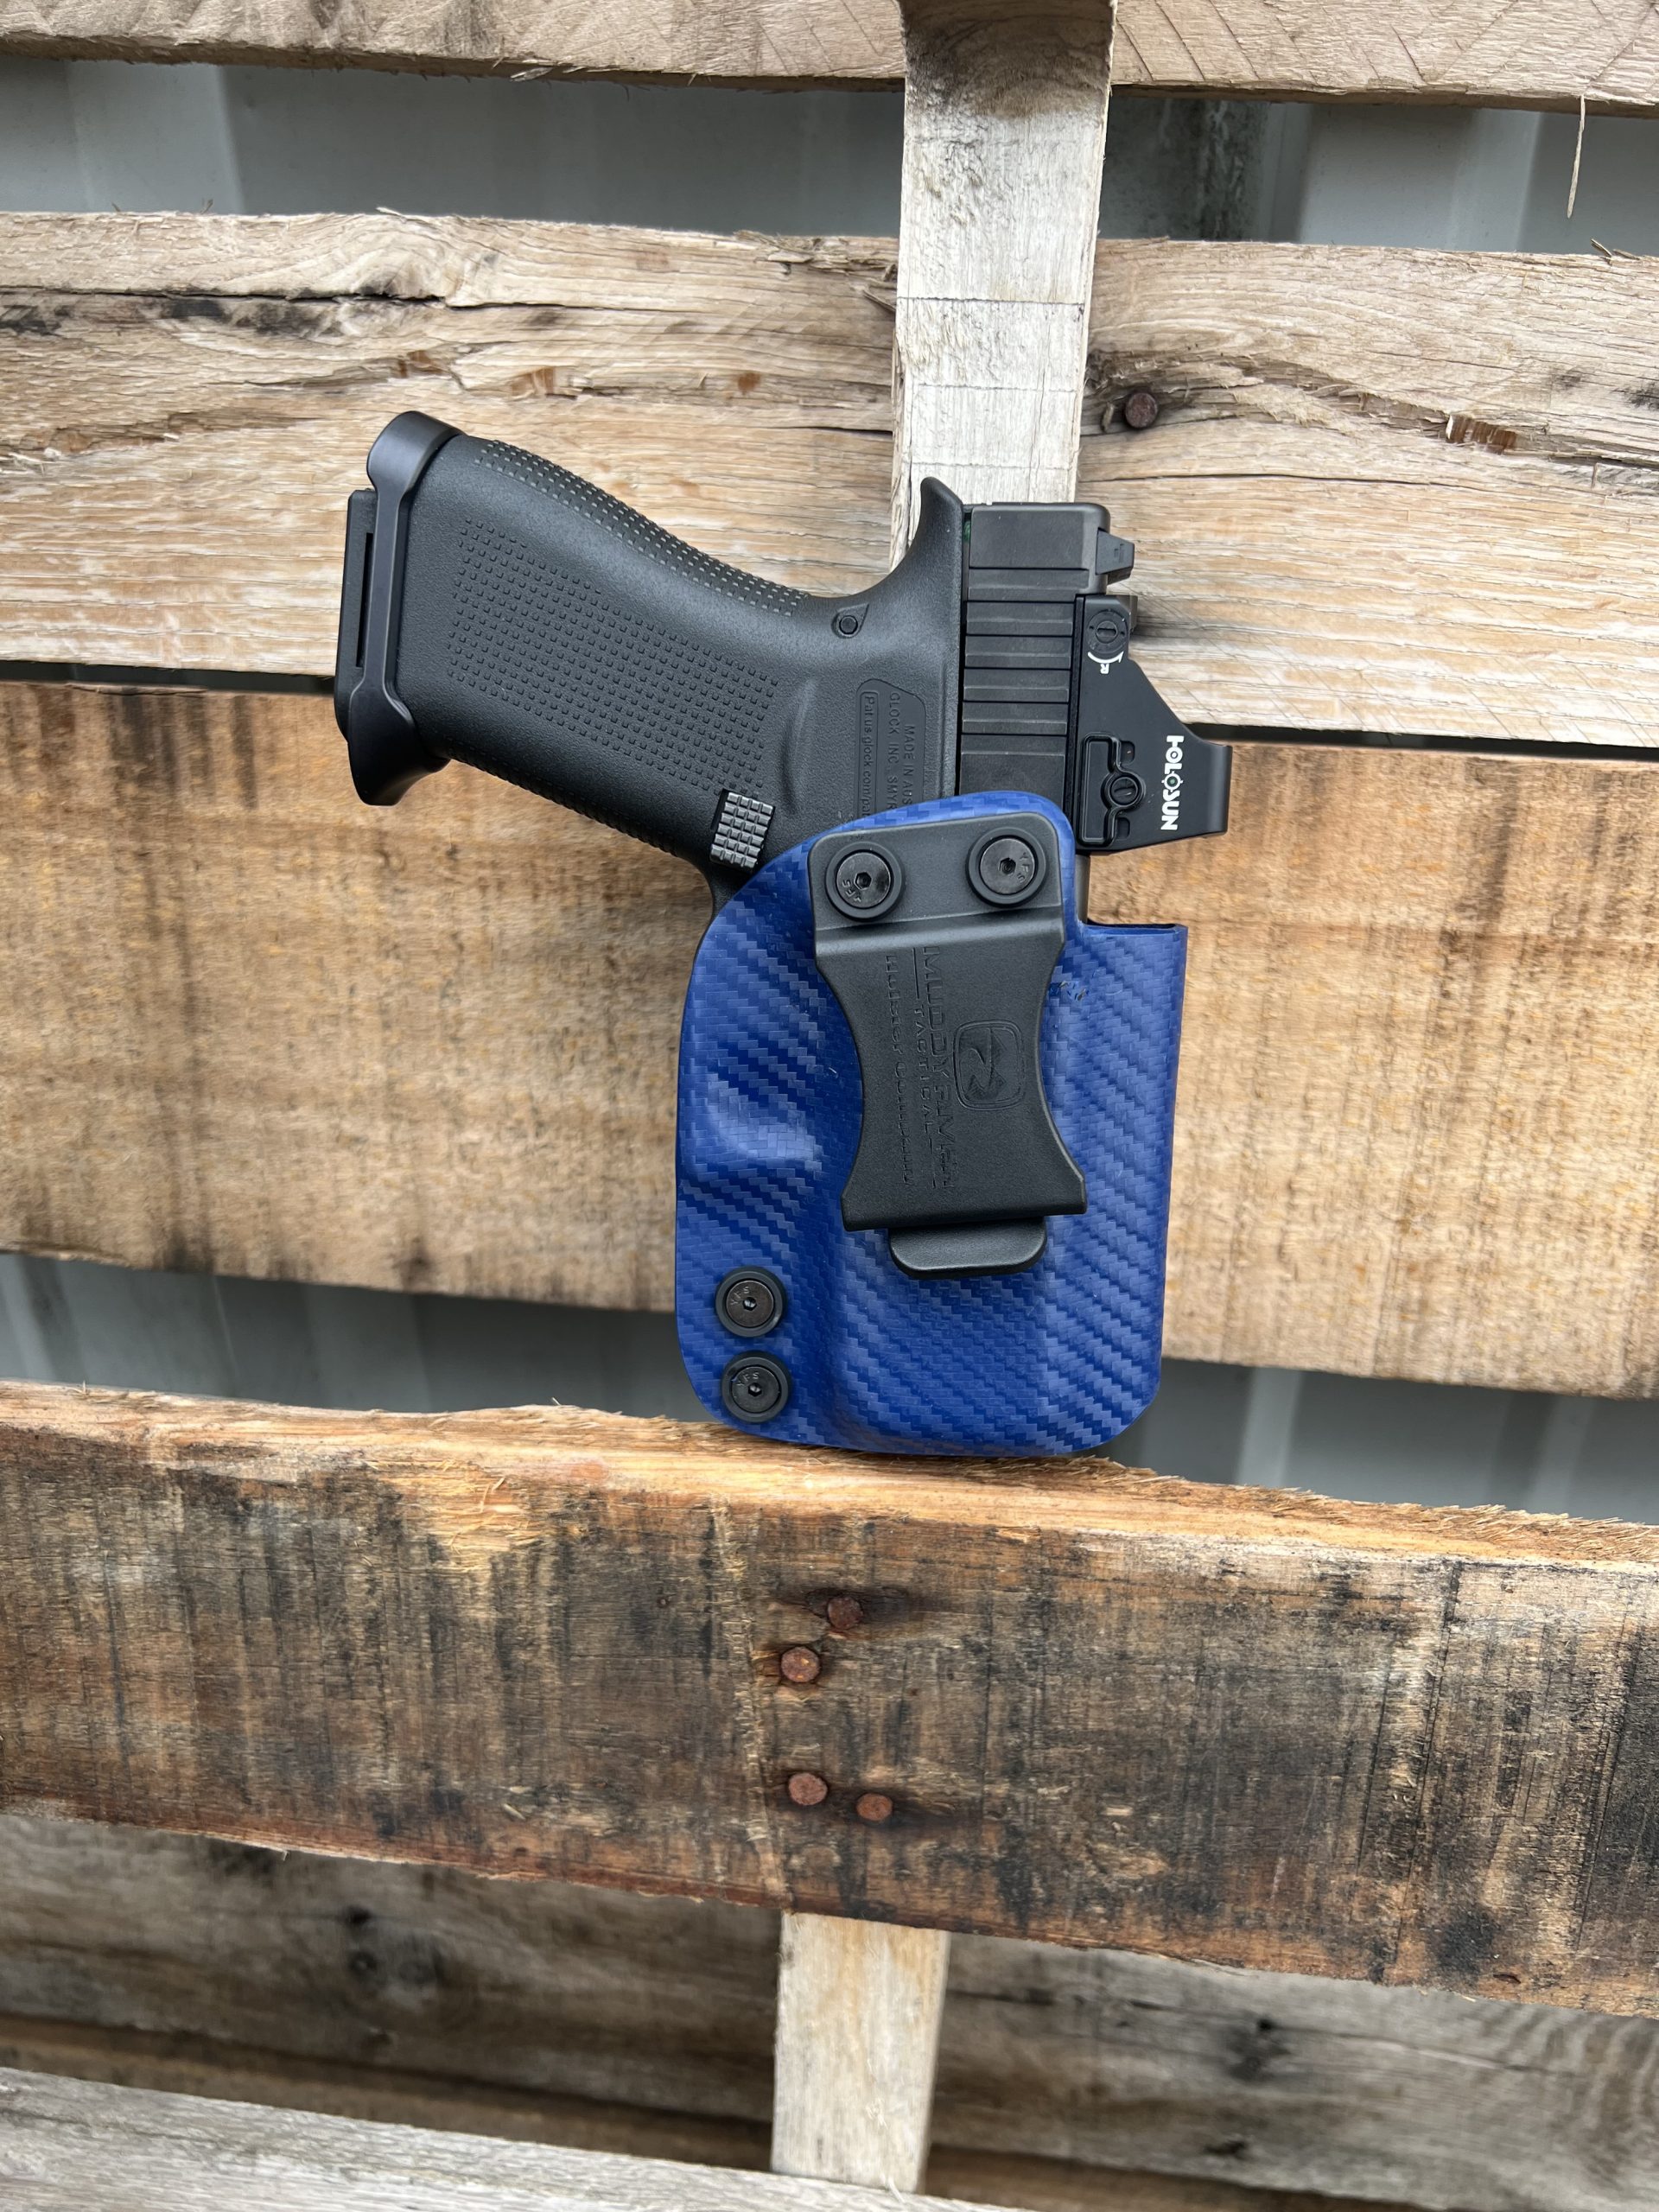 Glock X Mos Holster Iwb Kydex Holster Made In U S A